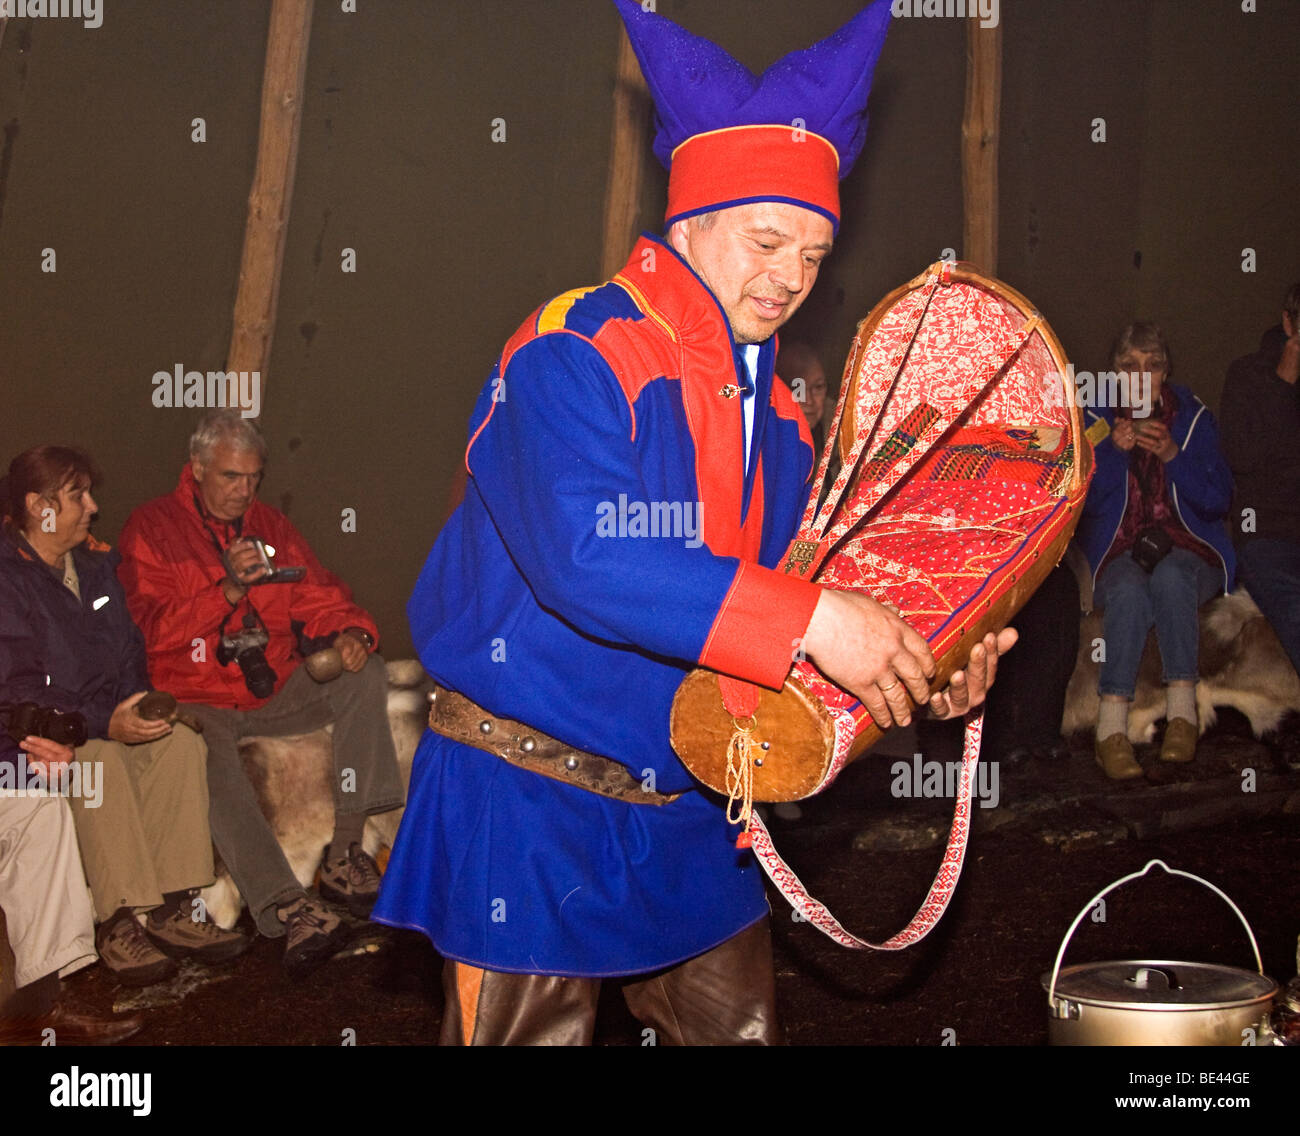 Sami man in traditional clothing shows a cradle used for infants and talks about daily life Stock Photo